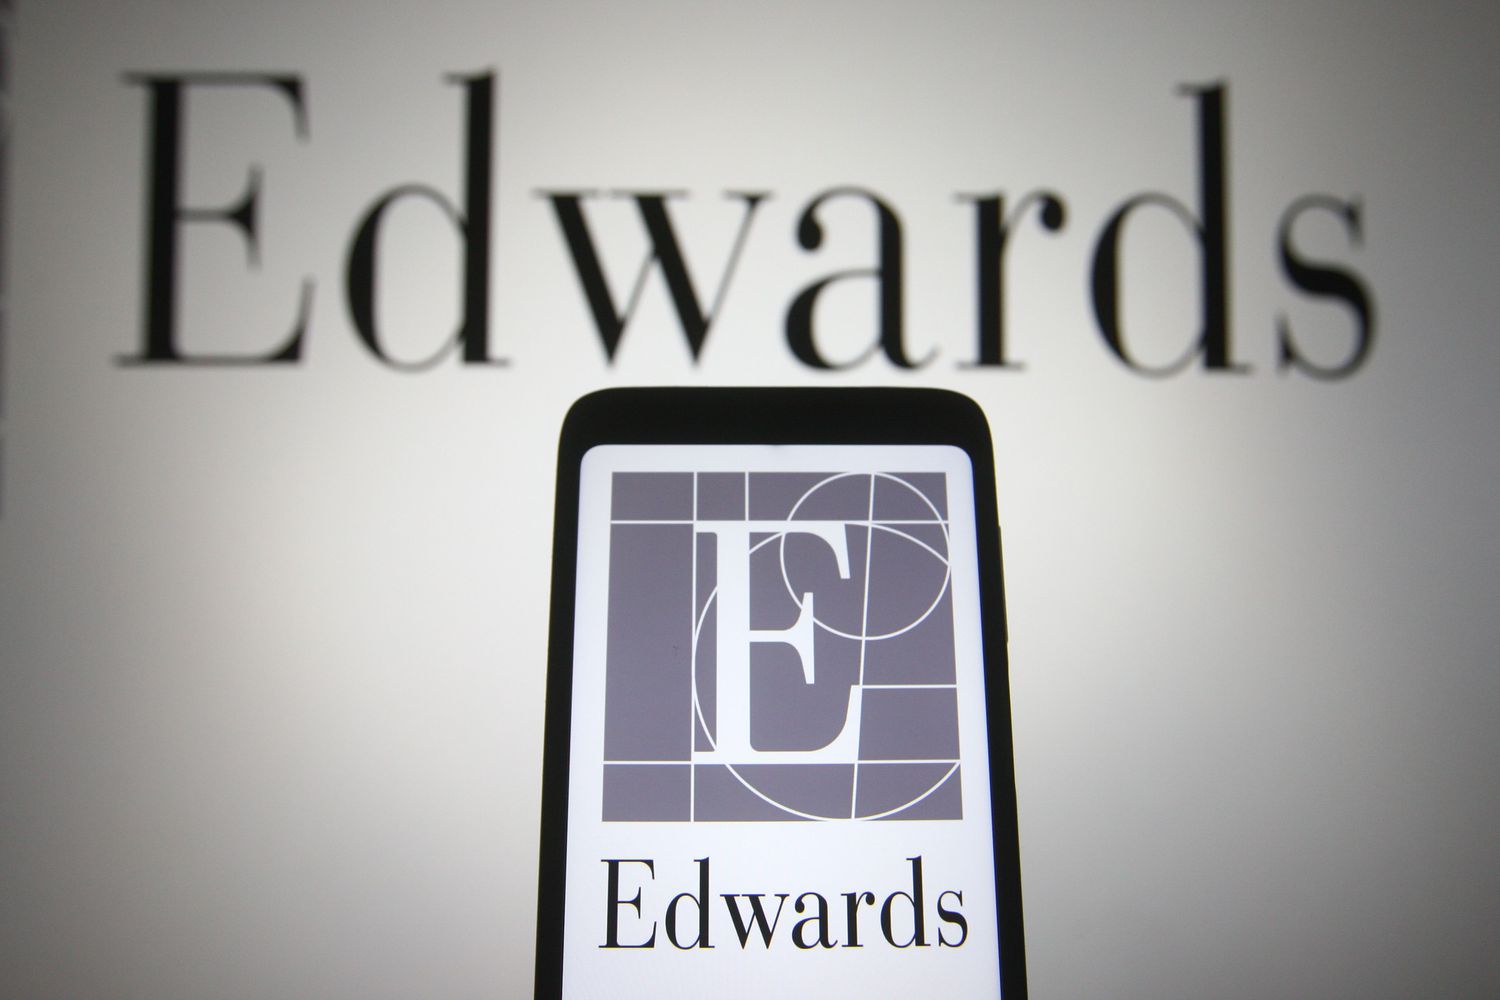 Edwards Lifesciences Stock Plummeted Today. Here’s Why [Video]